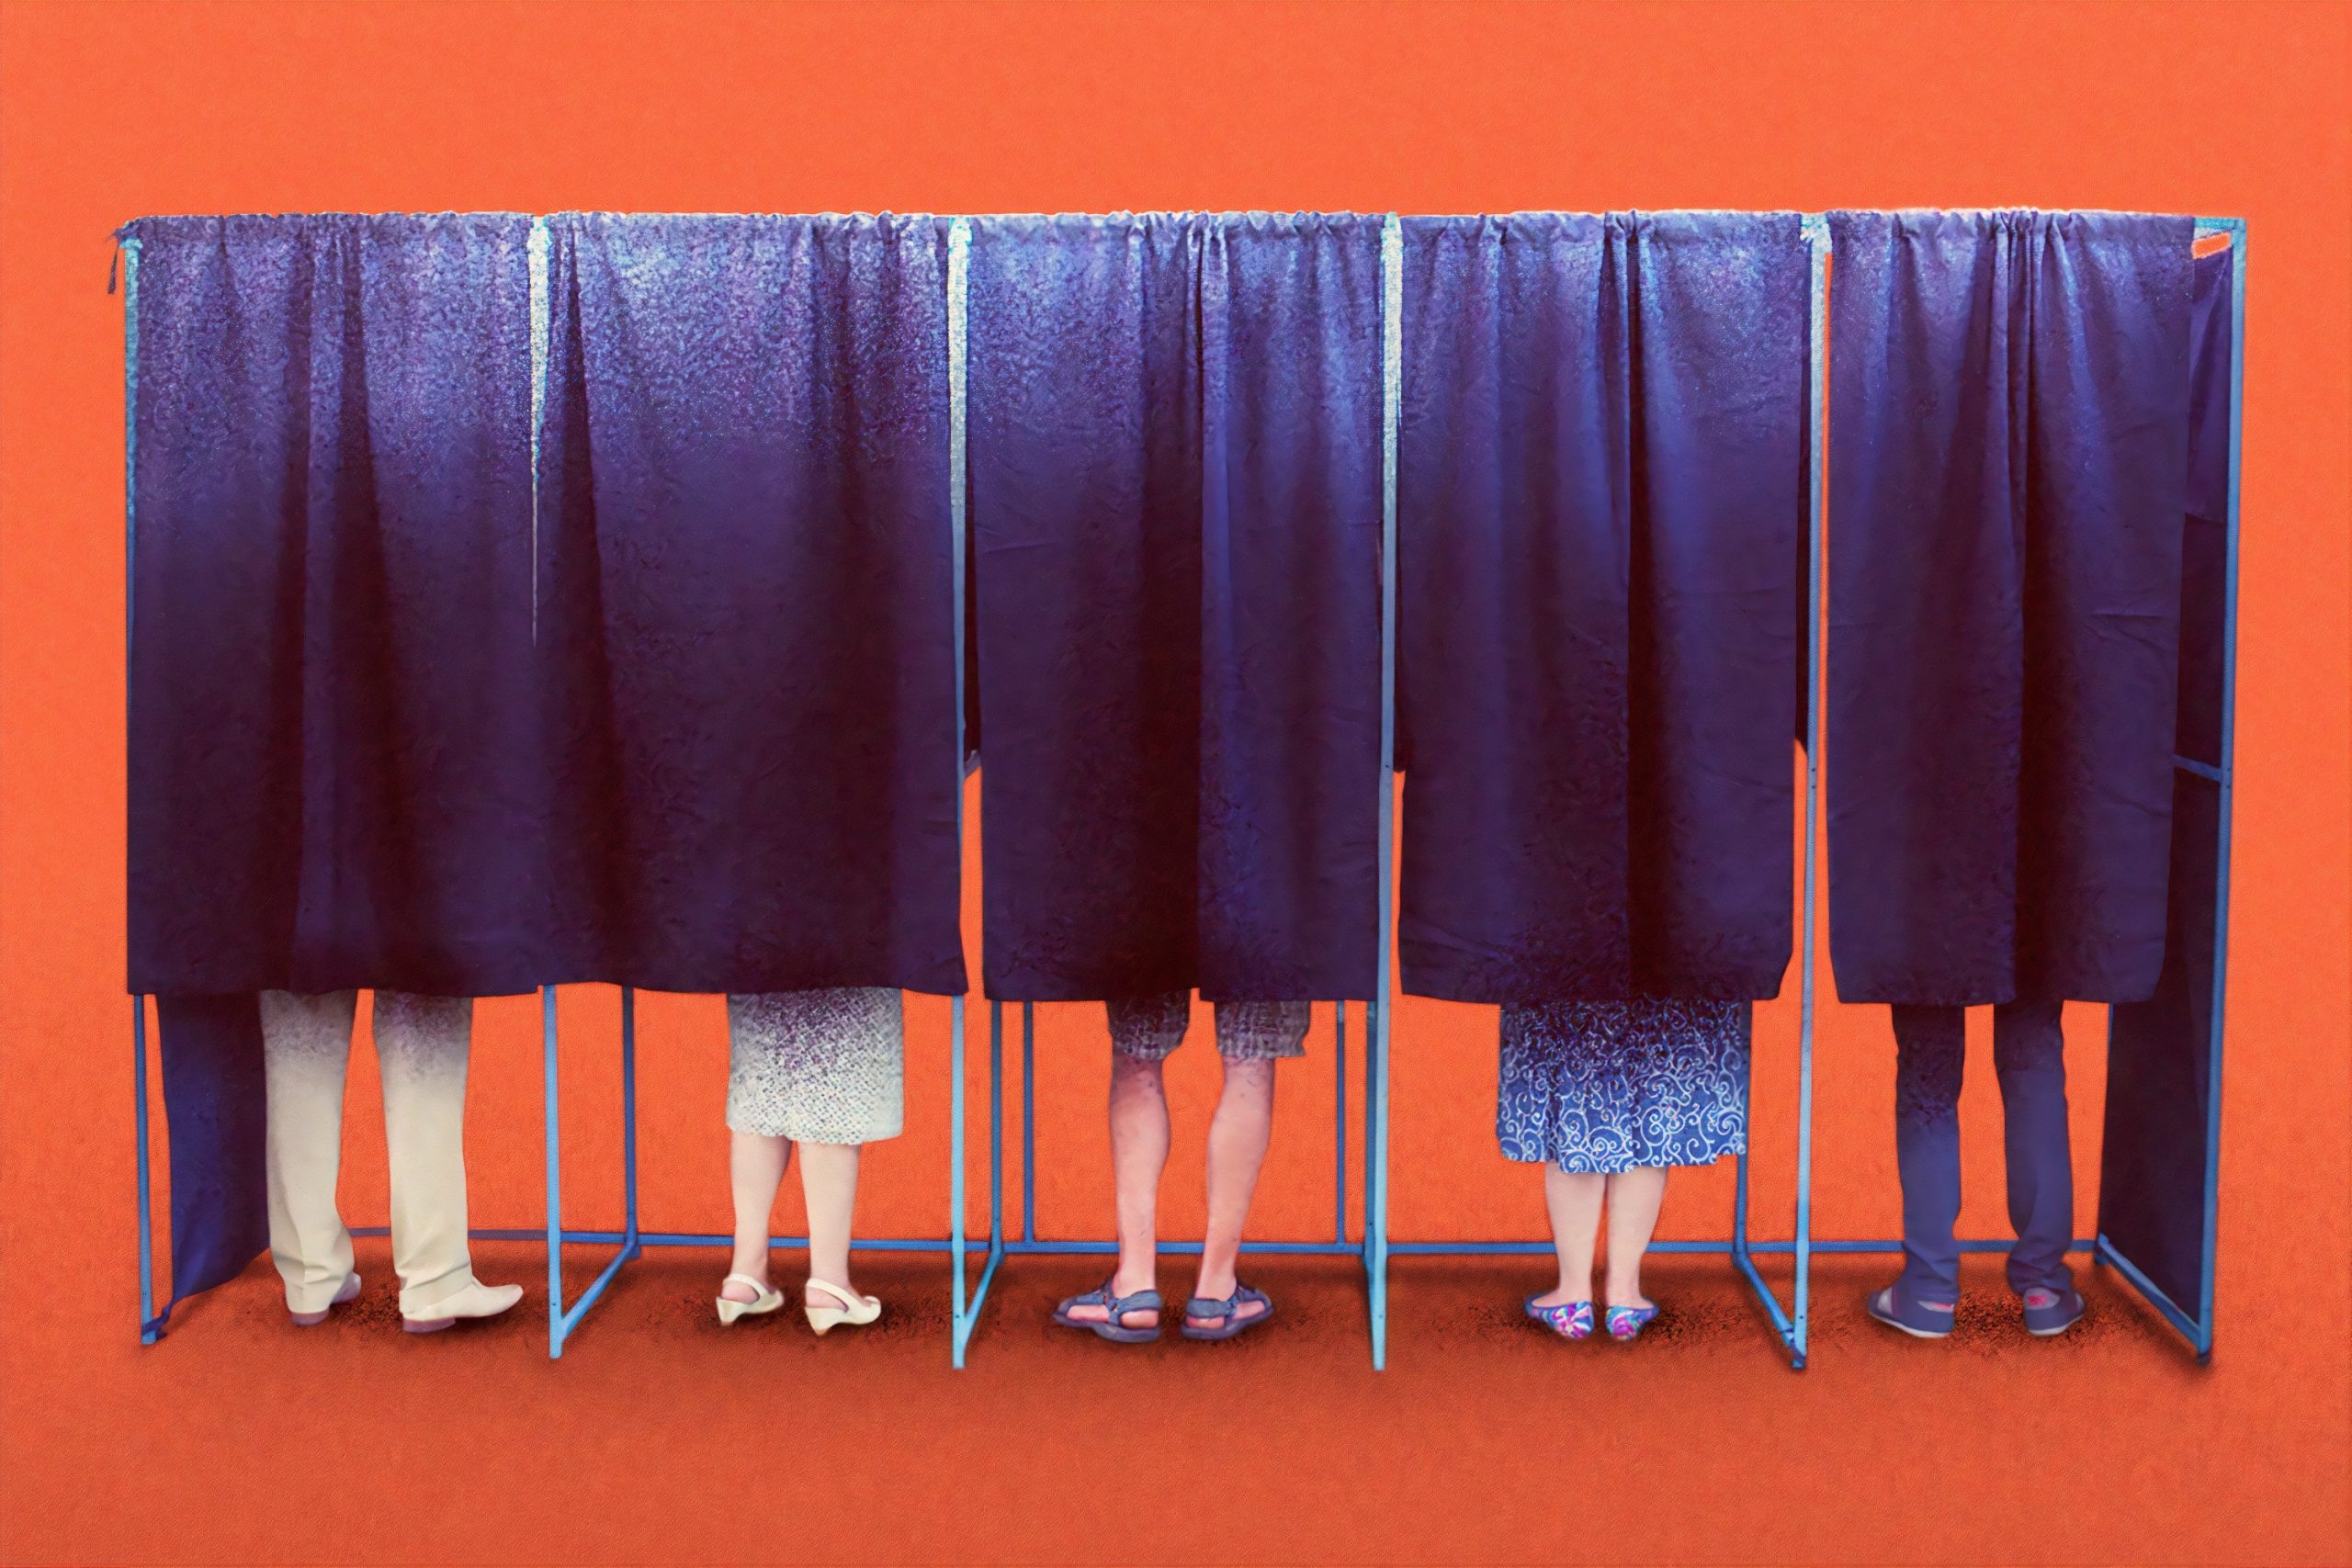 Why Internet Voting is a Threat to Our Democracy